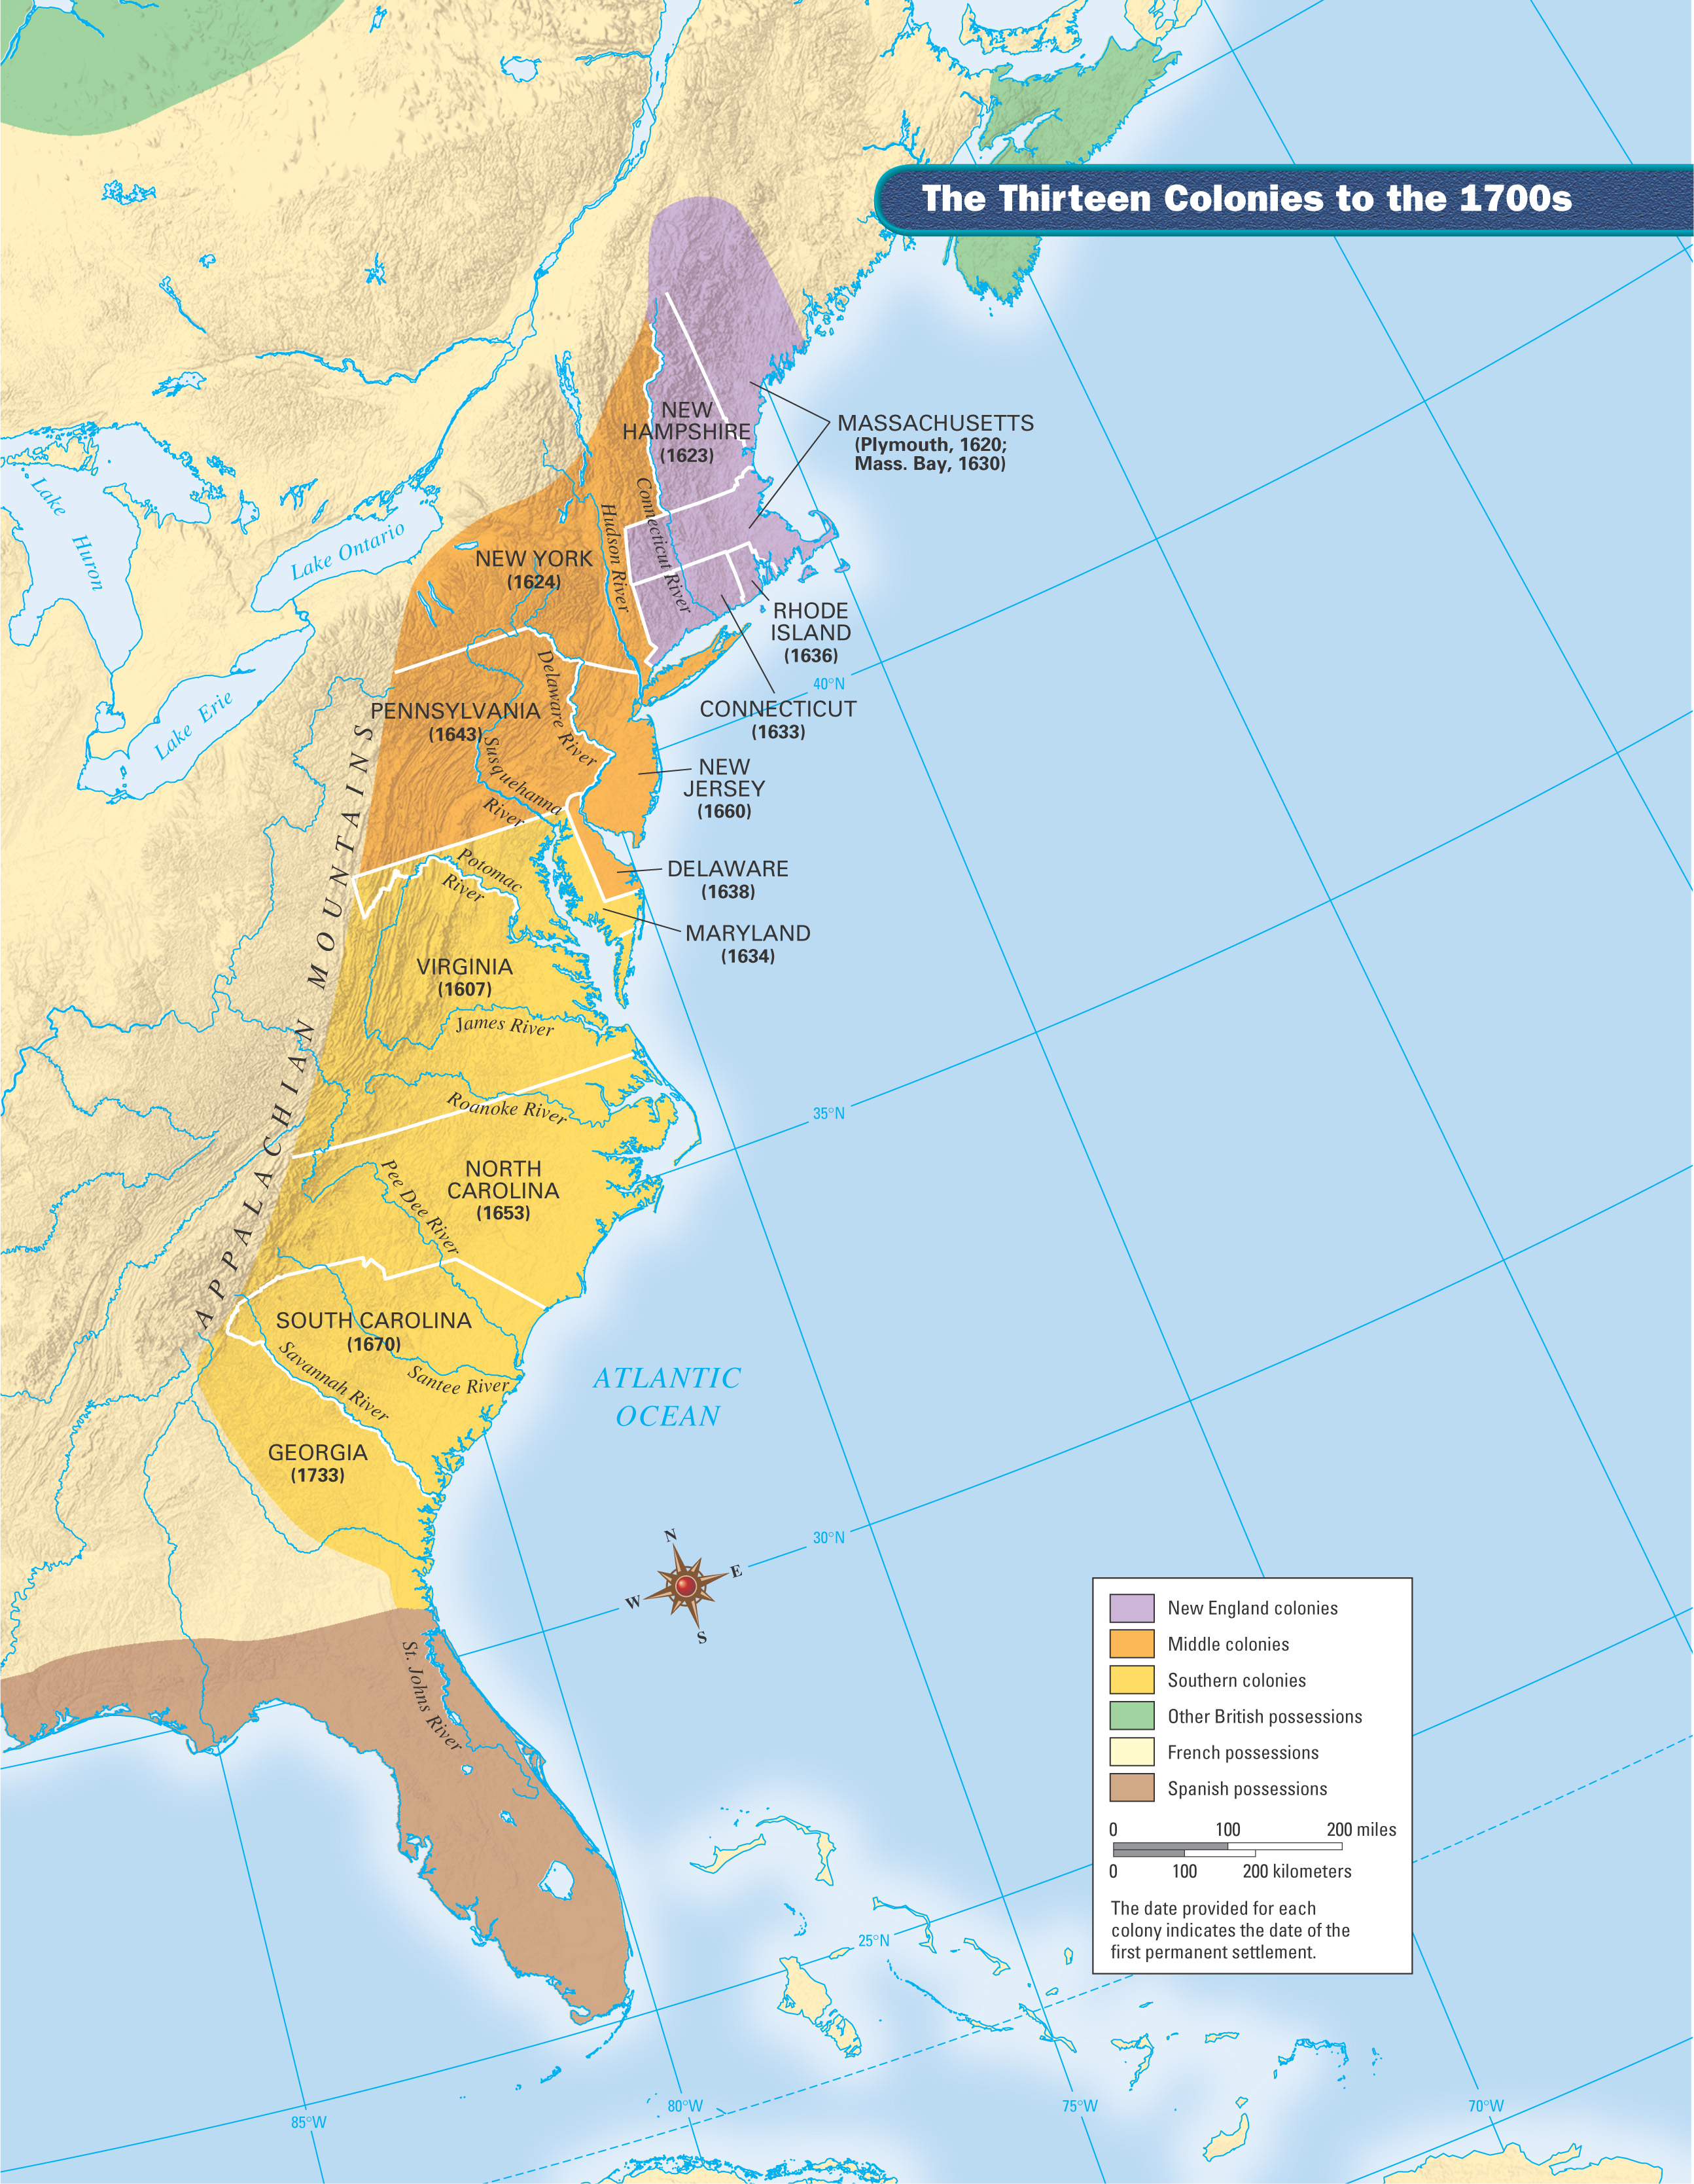 A map: the Thirteen Colonies to the 1700s